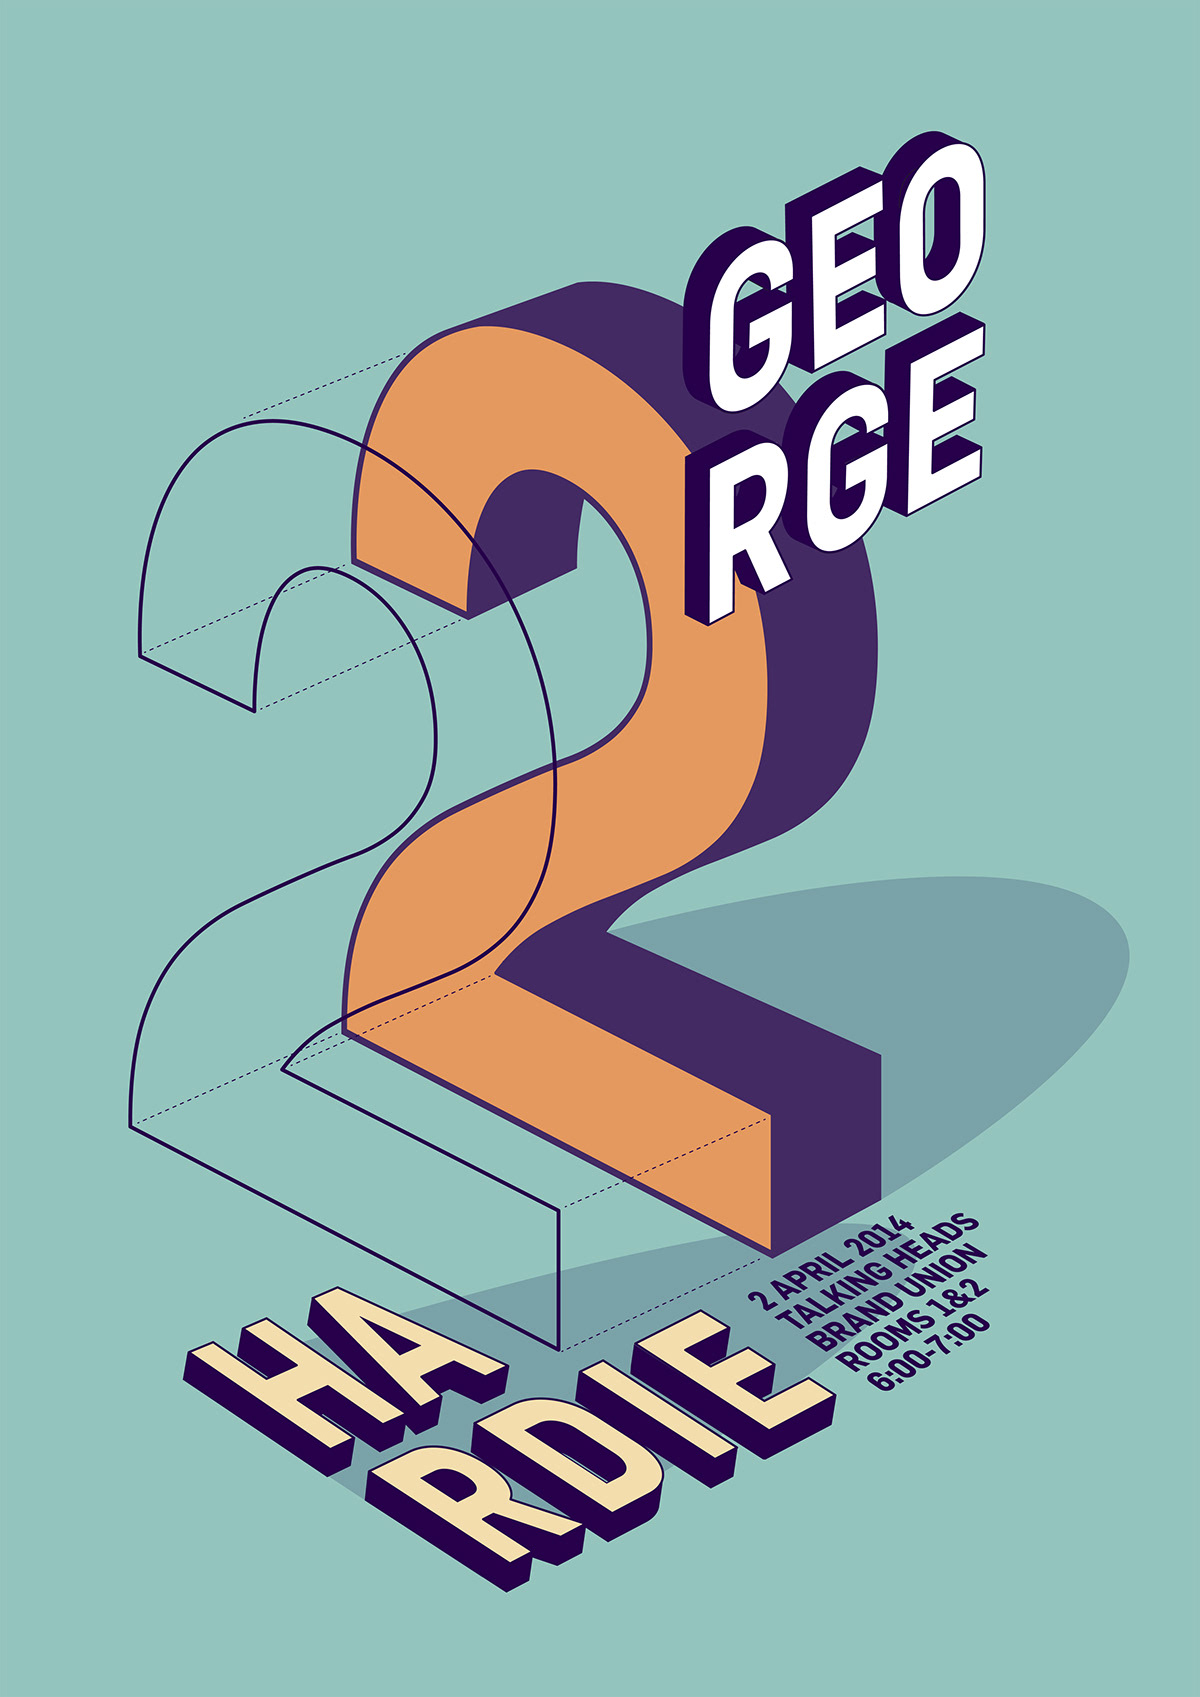 George hardie poster talk internal company Project Perspective type Retro